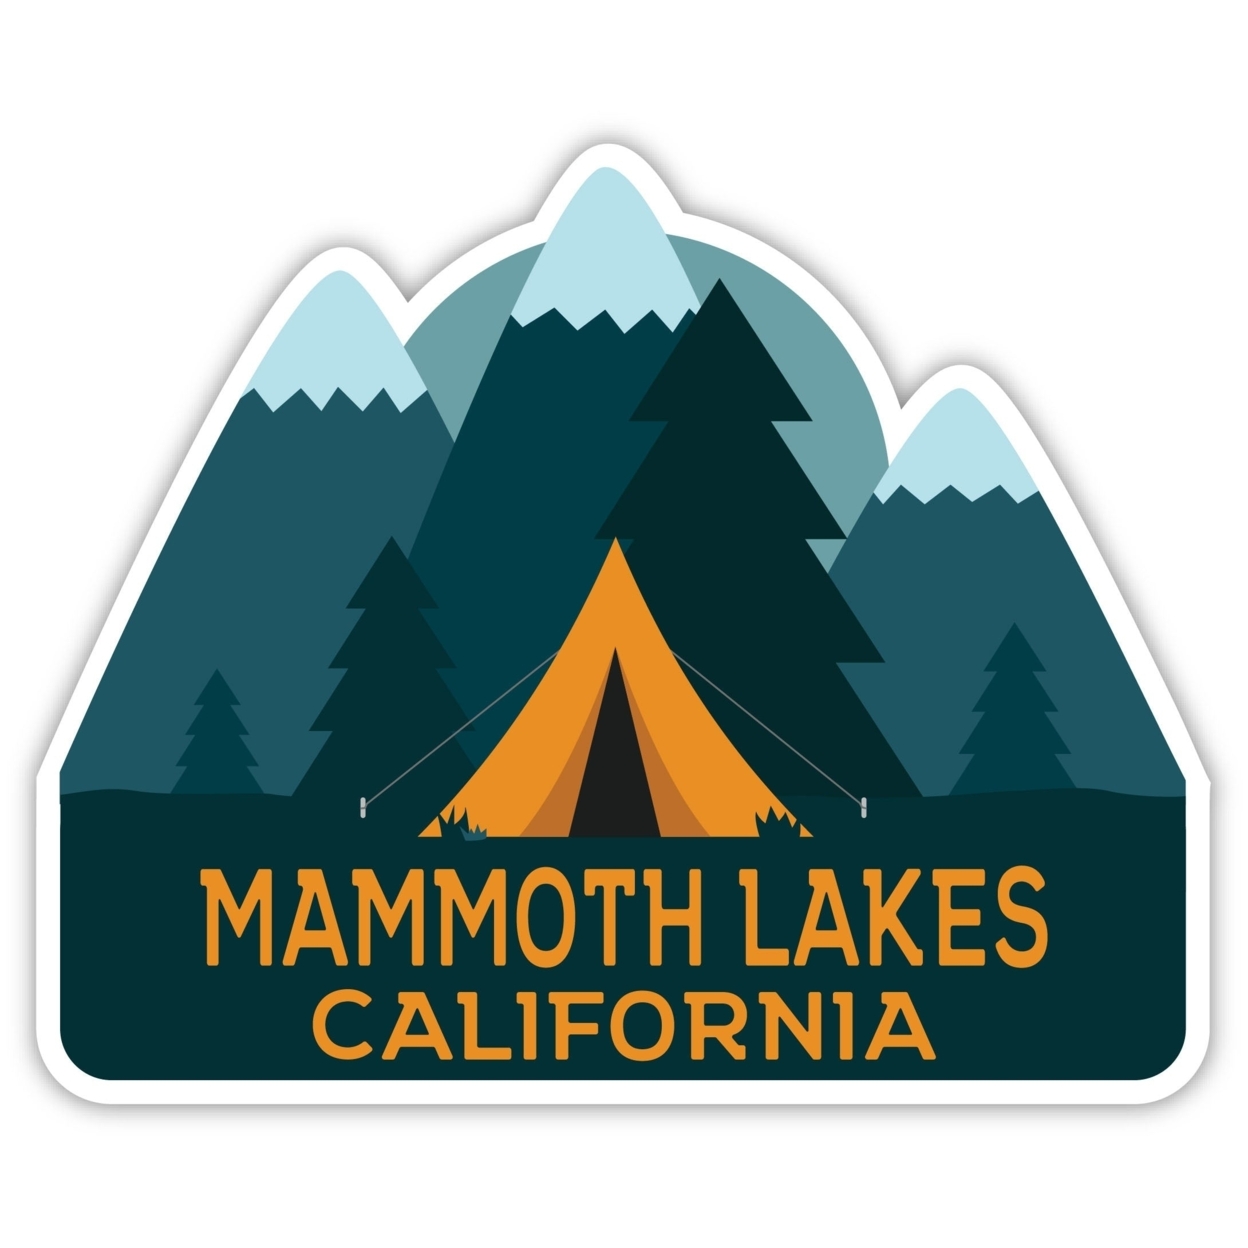 Mammoth Lakes California Souvenir Decorative Stickers (Choose Theme And Size) - 2-Inch, Adventures Awaits